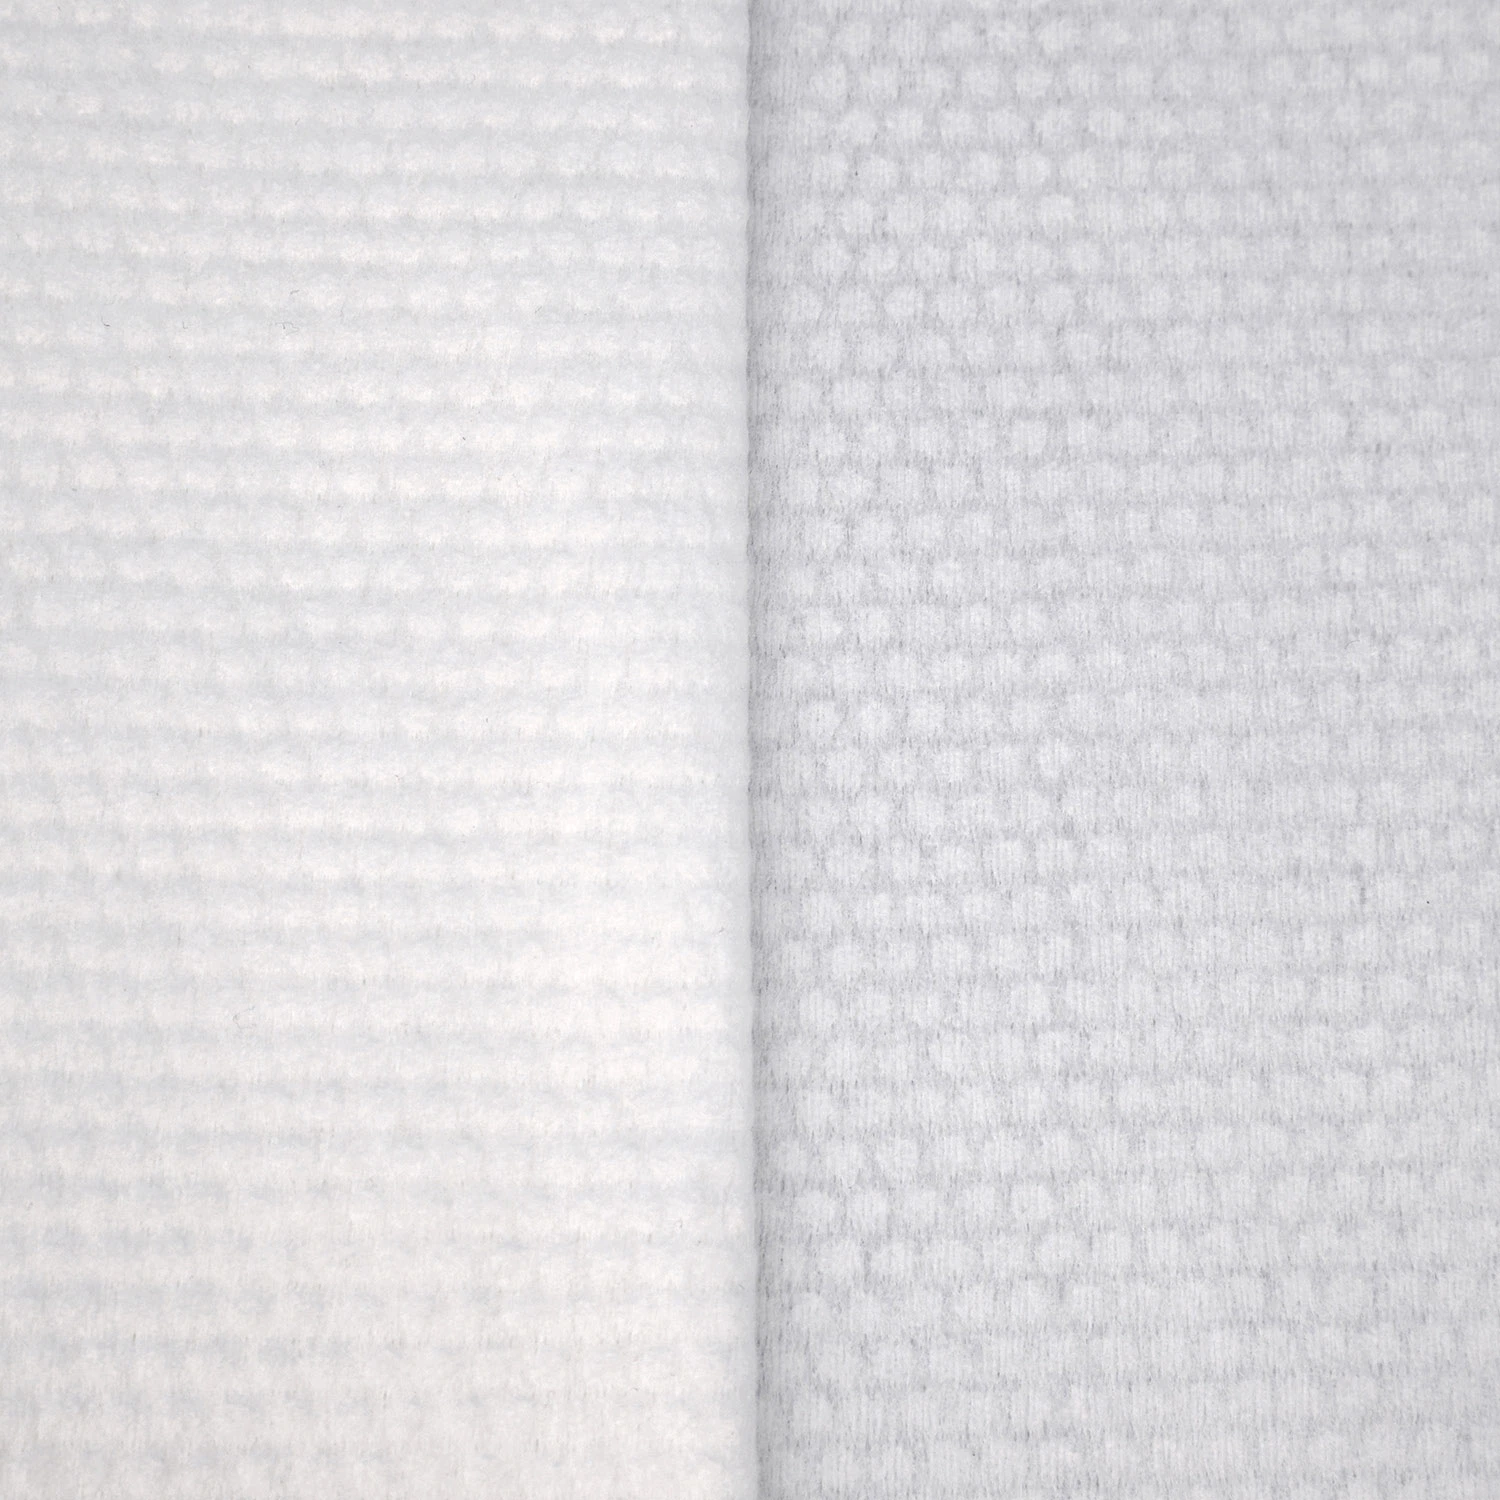 Spunlace Non Woven Fabric, Pearl Partten, Woodpulp+Polyester Material for Personal Care, Disposable Wipes, Disposable Hair Towels, Disposable Wipes